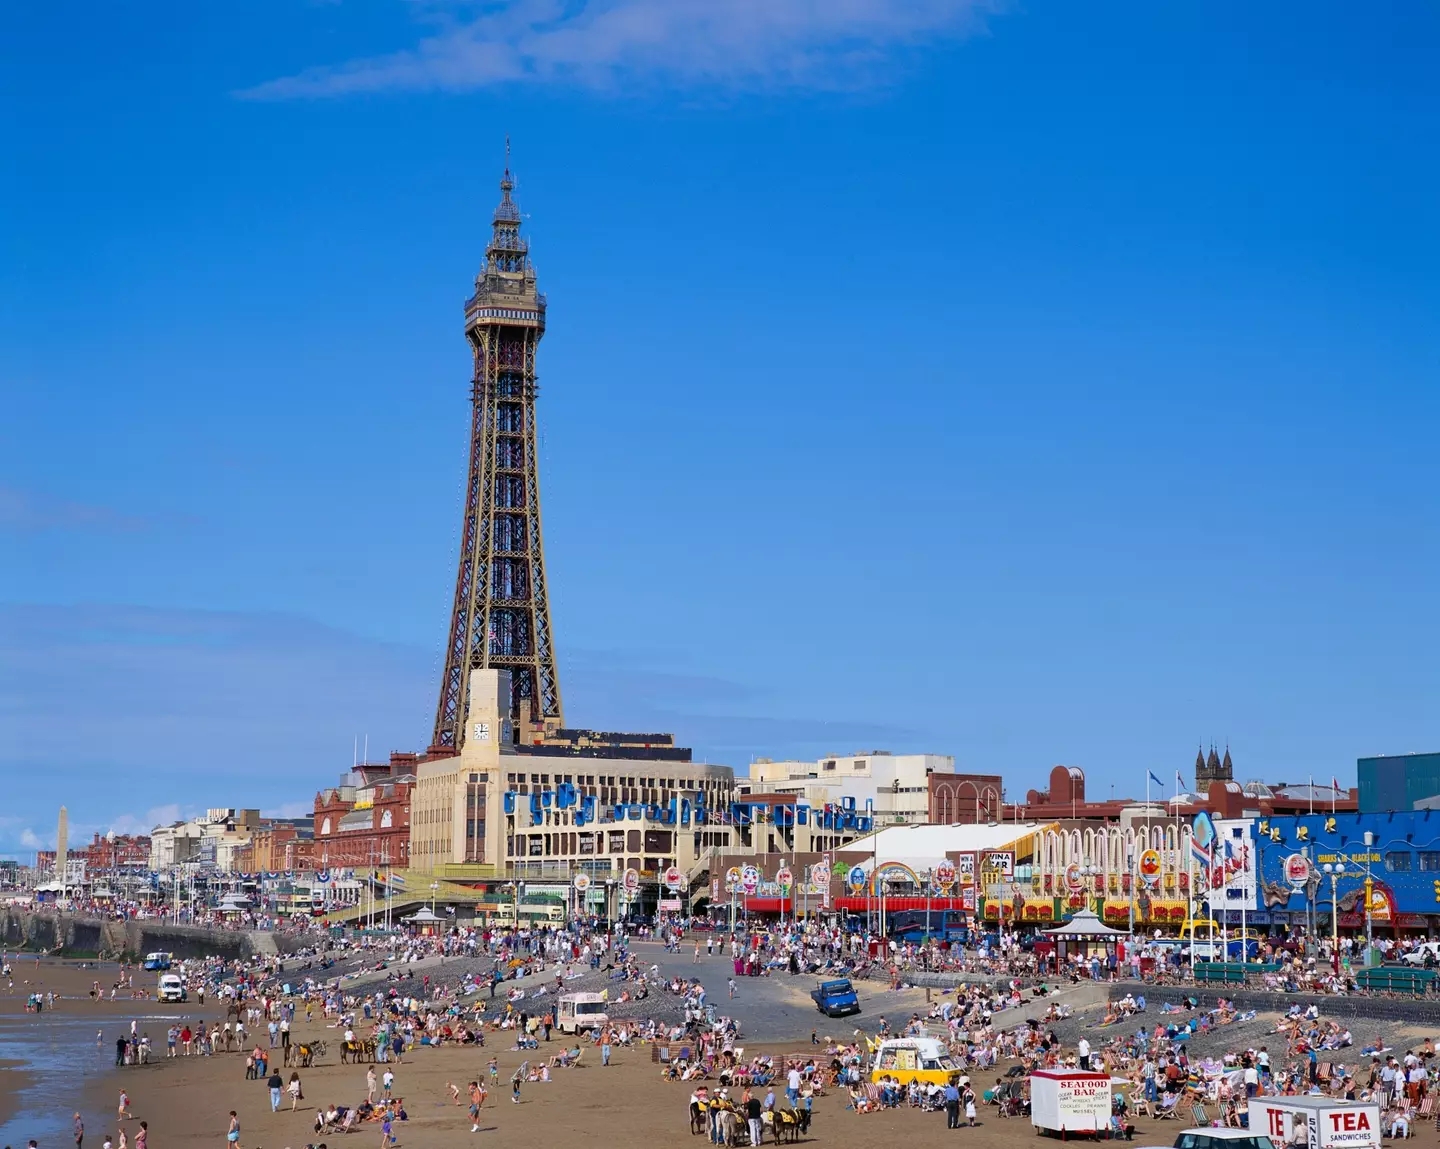 The hotel is on Blackpool's famous Promenade.